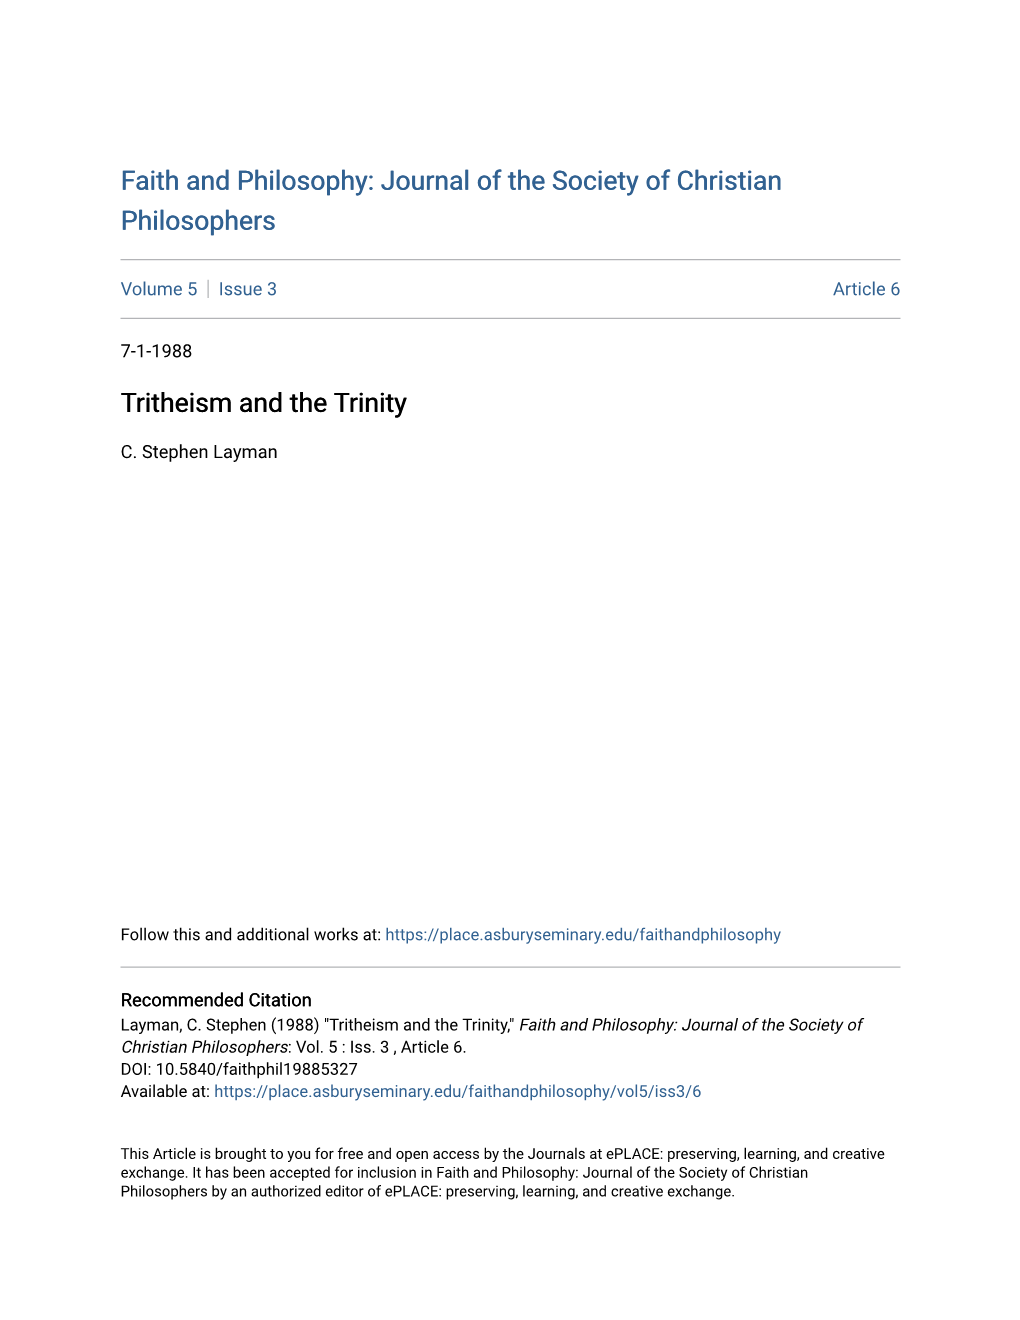 Tritheism and the Trinity